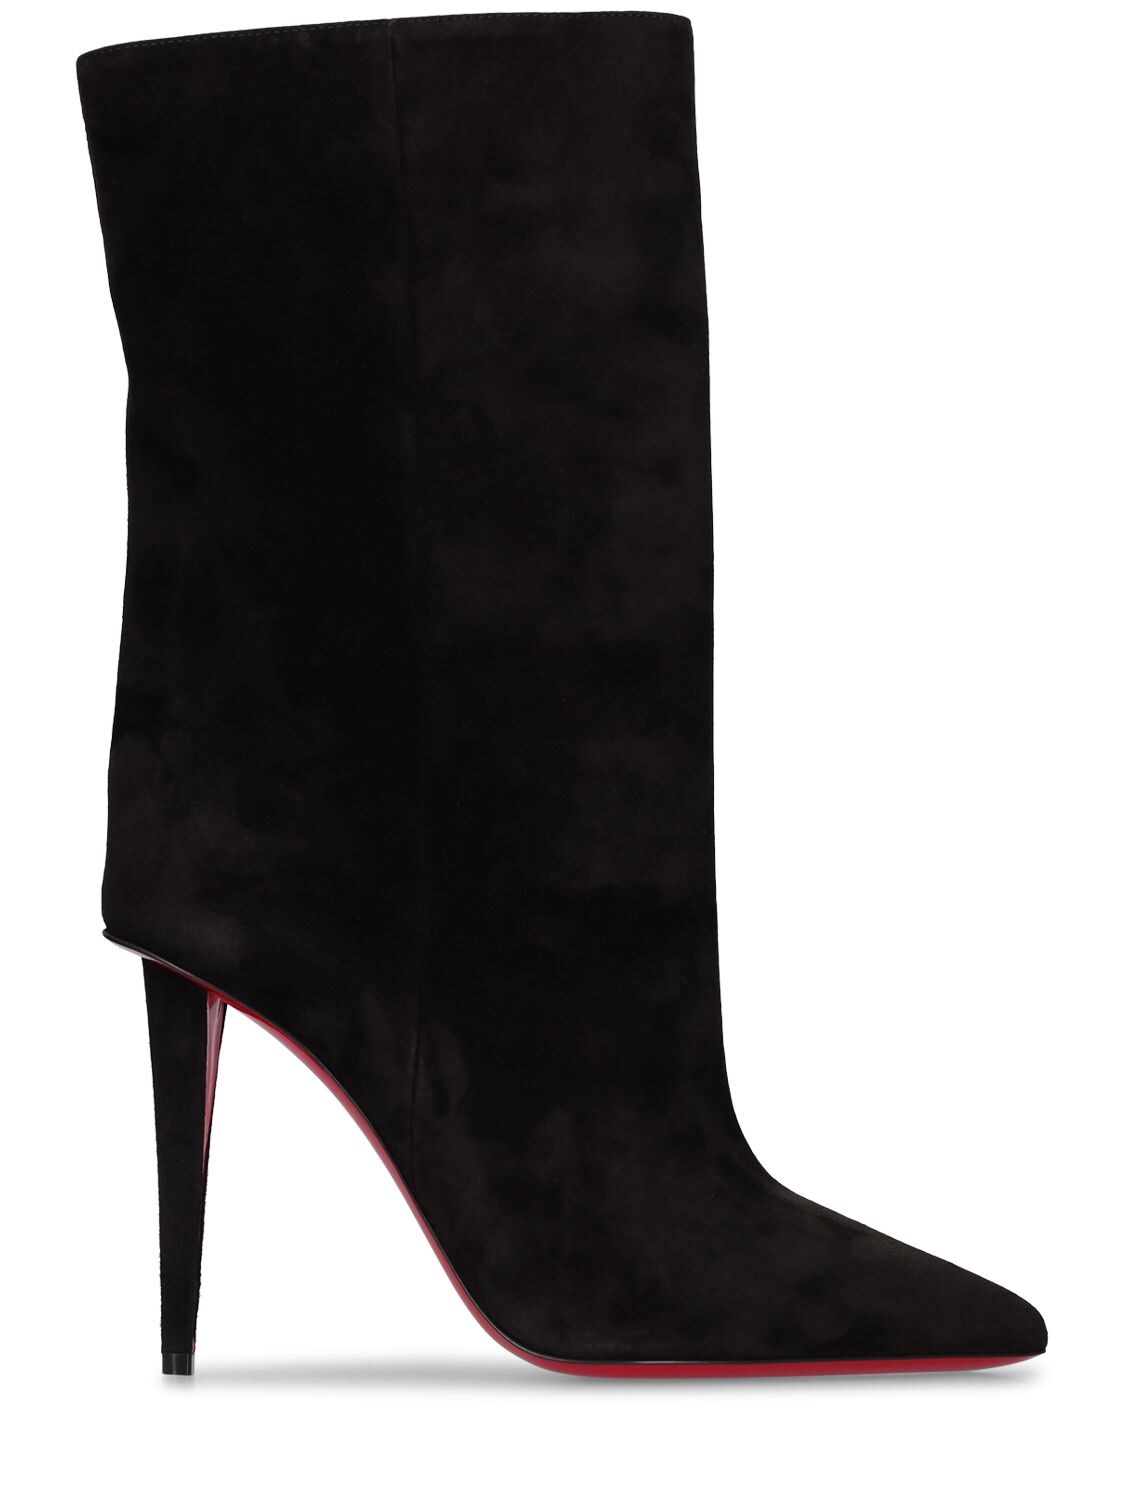 CHRISTIAN LOUBOUTIN 100mm Astrilarge Suede Tall Boots